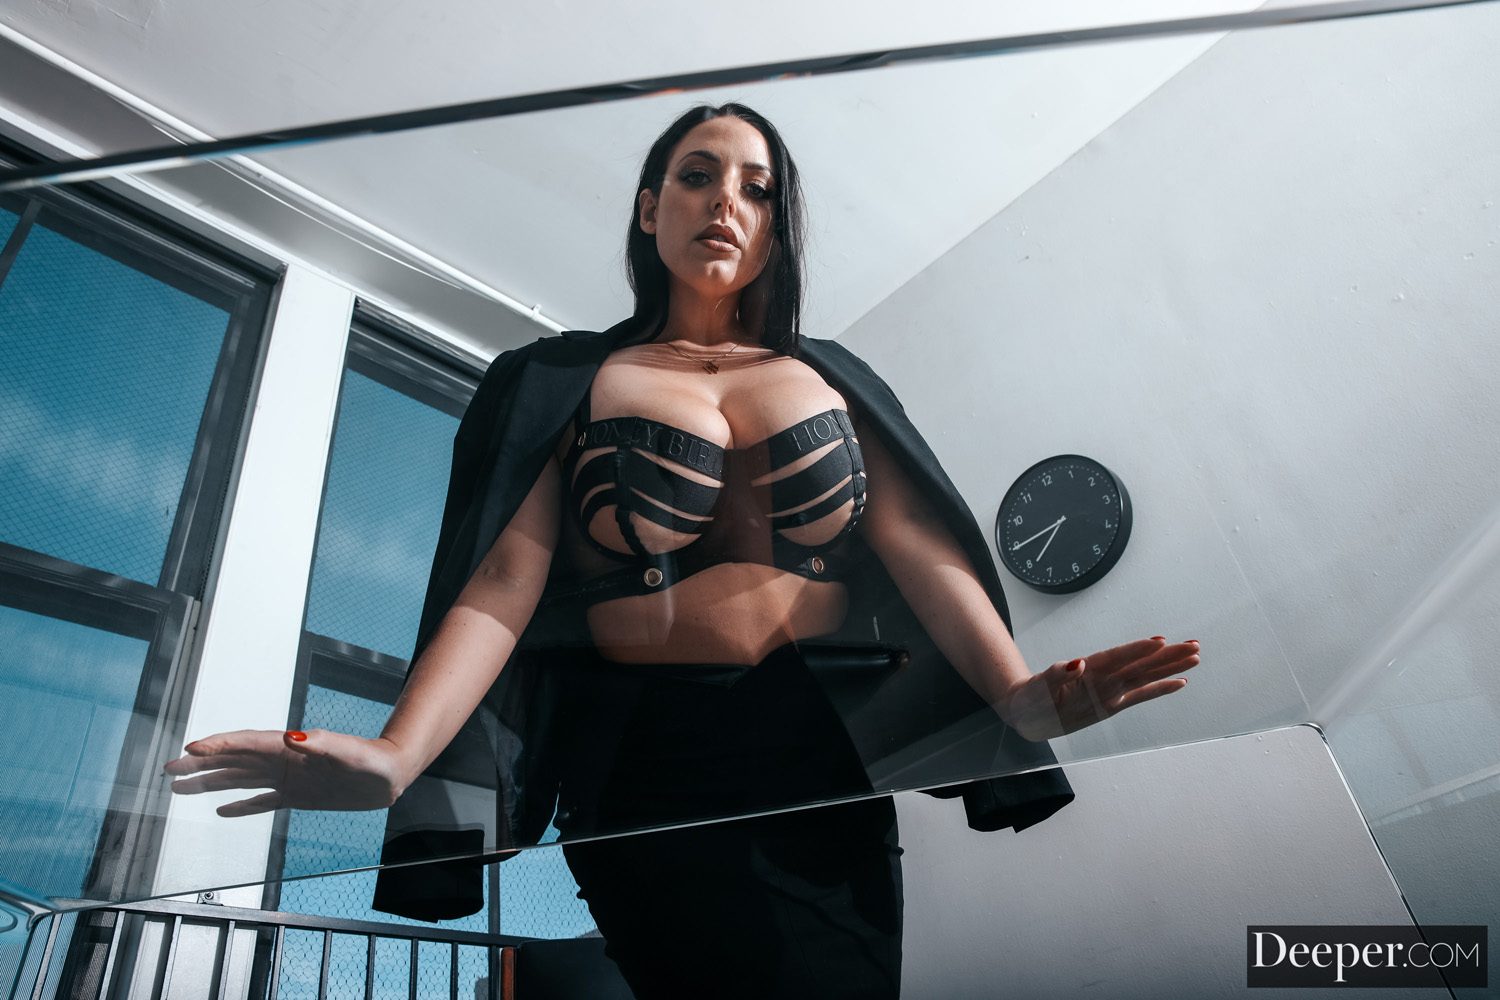 Angela White bangs a hot guy from the firm in her office